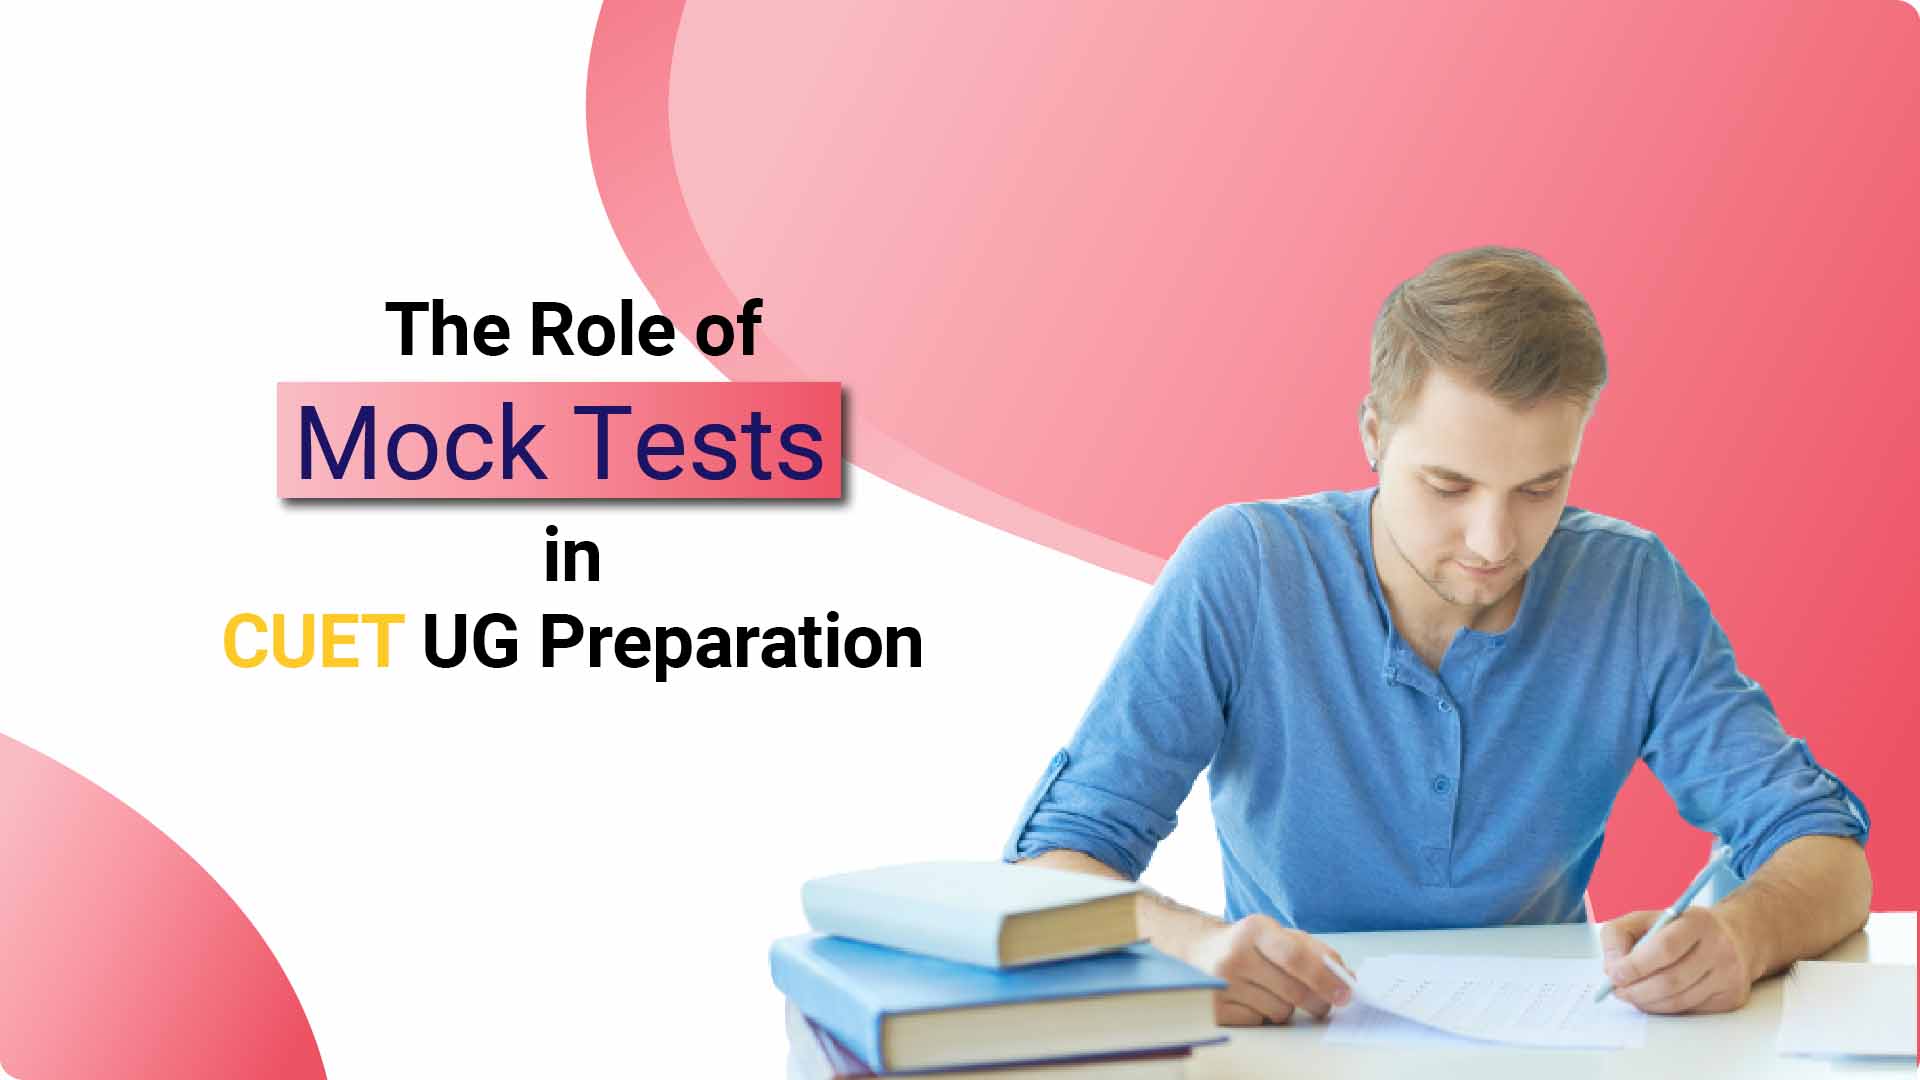 The Role of Mock Tests in CUET UG Preparation